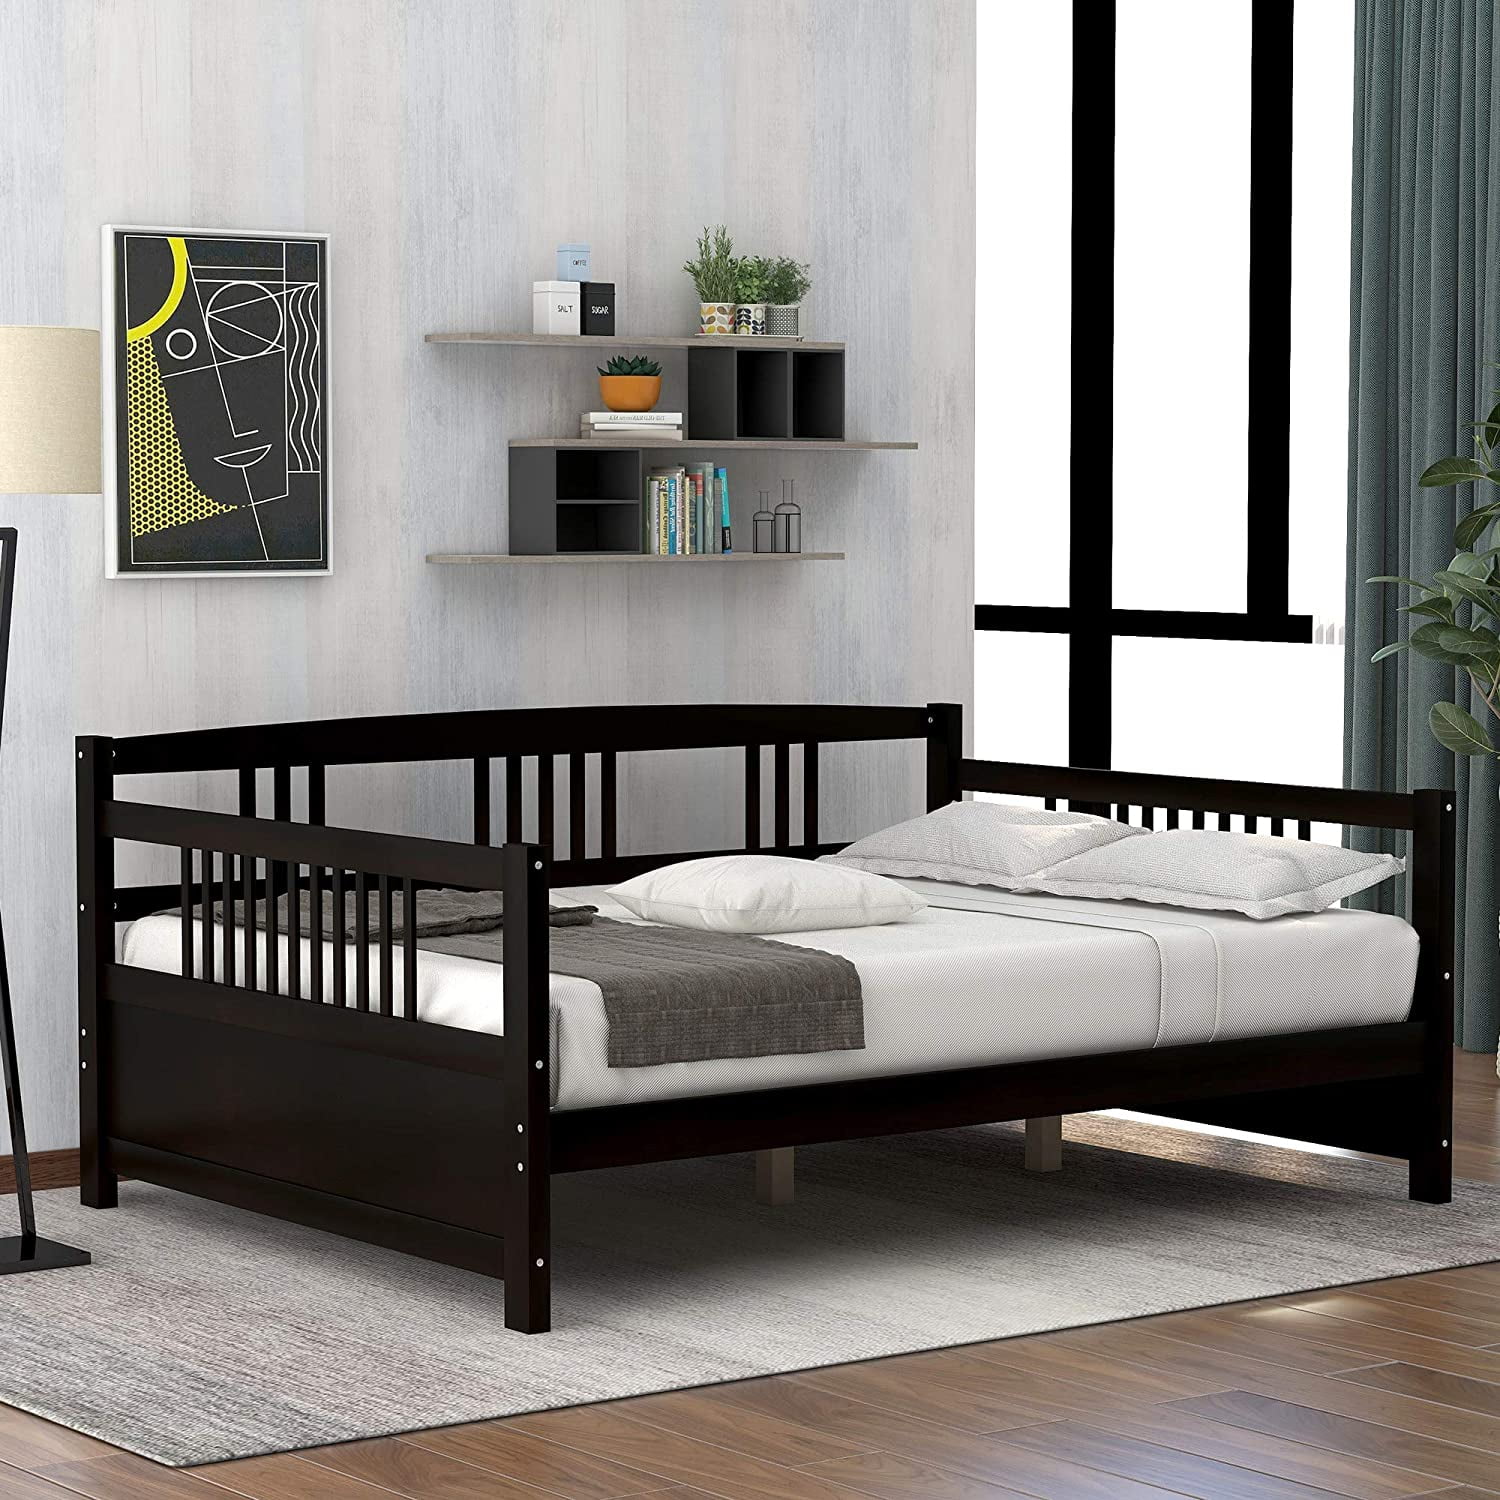 Churanty Solid Wood Daybed, Full Size Bed Frame Multi ...